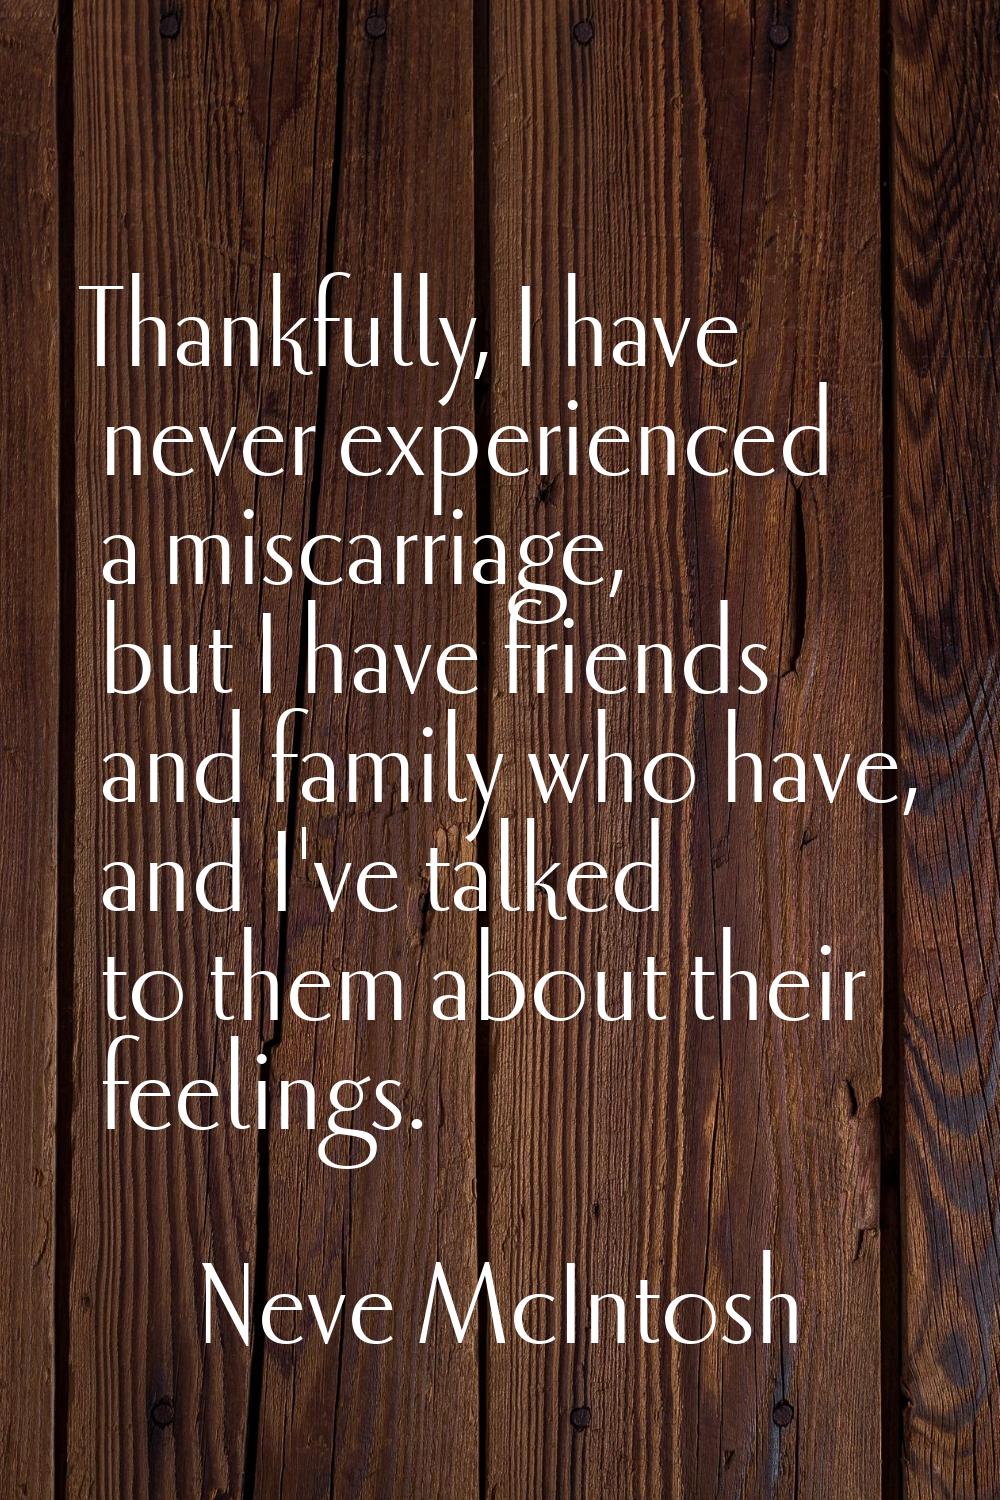 Thankfully, I have never experienced a miscarriage, but I have friends and family who have, and I'v